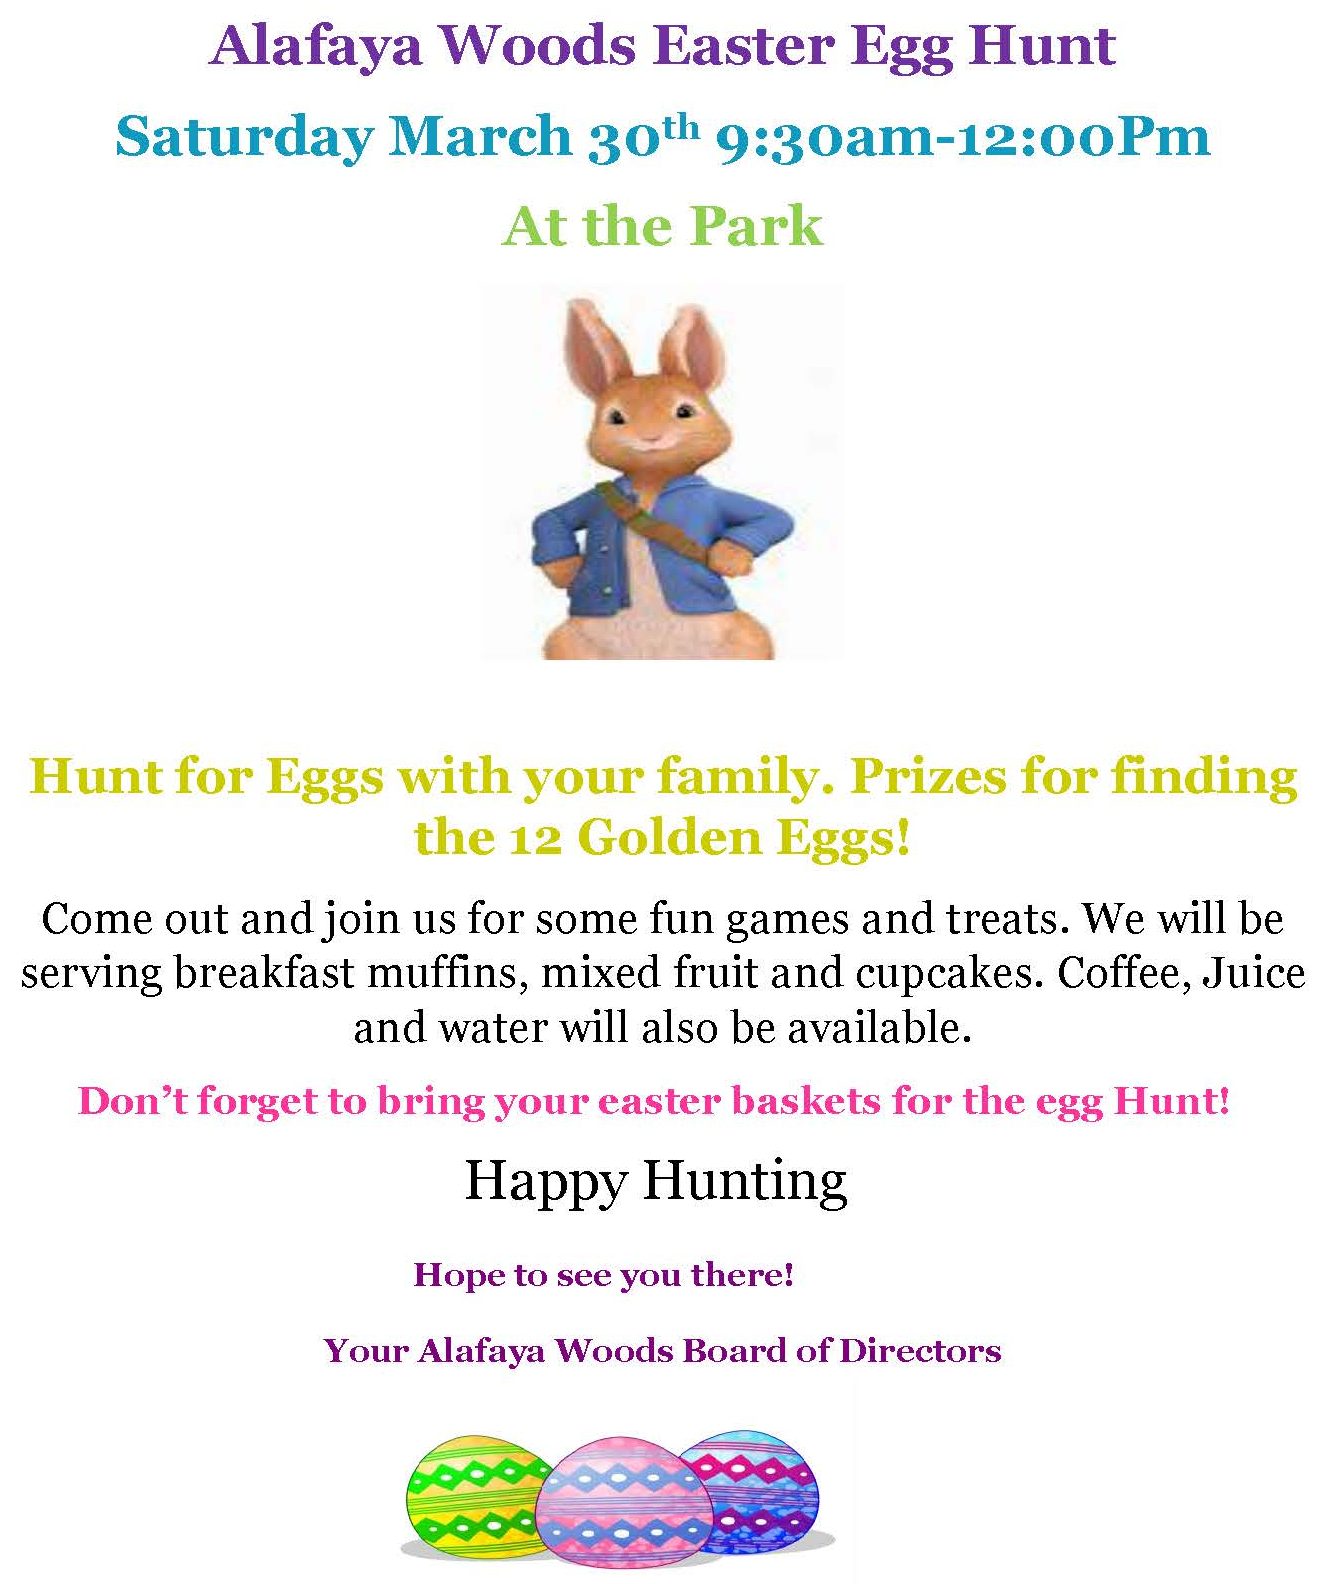 Alafaya Woods Easter Egg Hunt
Saturday March 30th 9:30am-12:00Pm
At the Park
Hunt for Eggs with your family. Prizes for finding the 12 Golden Eggs!
Come out and join us for some fun games and treats. We will be serving breakfast muffins, mixed fruit and cupcakes. Coffee, Juice and water will also be available.
Don’t forget to bring your easter baskets for the egg Hunt!
Happy Hunting
Hope to see you there!
Your Alafaya Woods Board of Directors